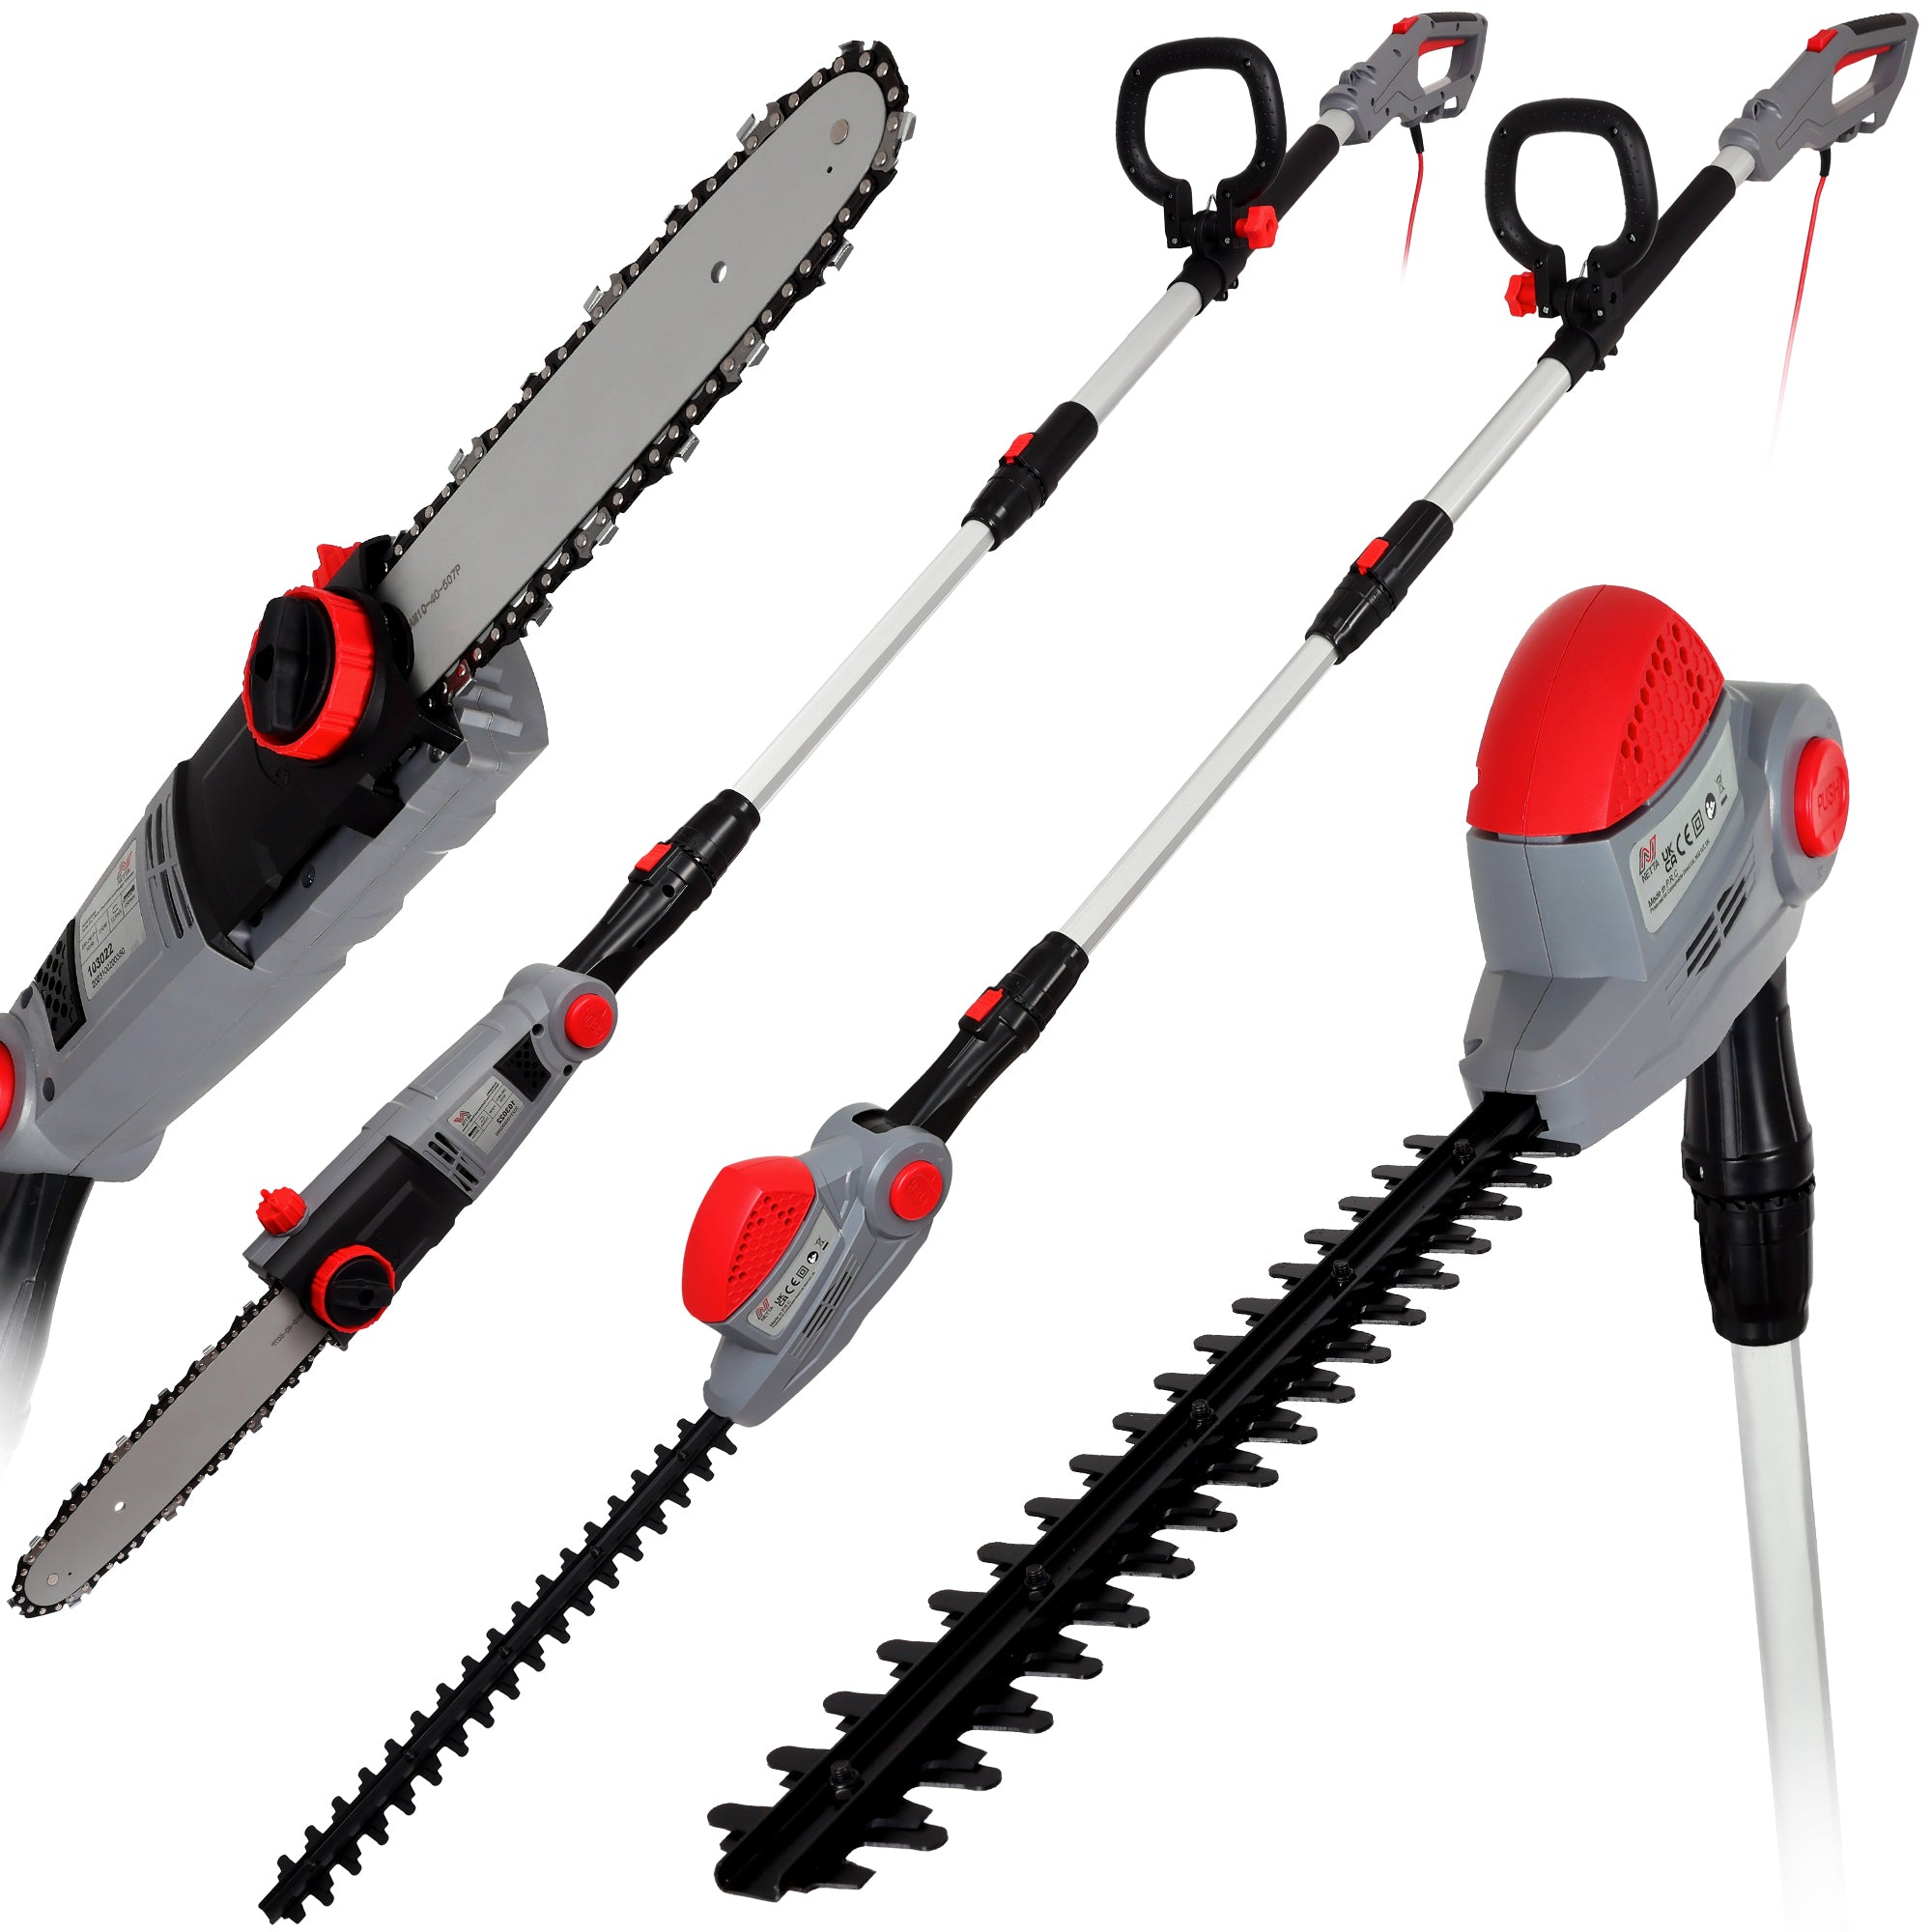 NETTA 710W 2 in 1 Pole Long Reach Hedge Timmer and Chainsaw